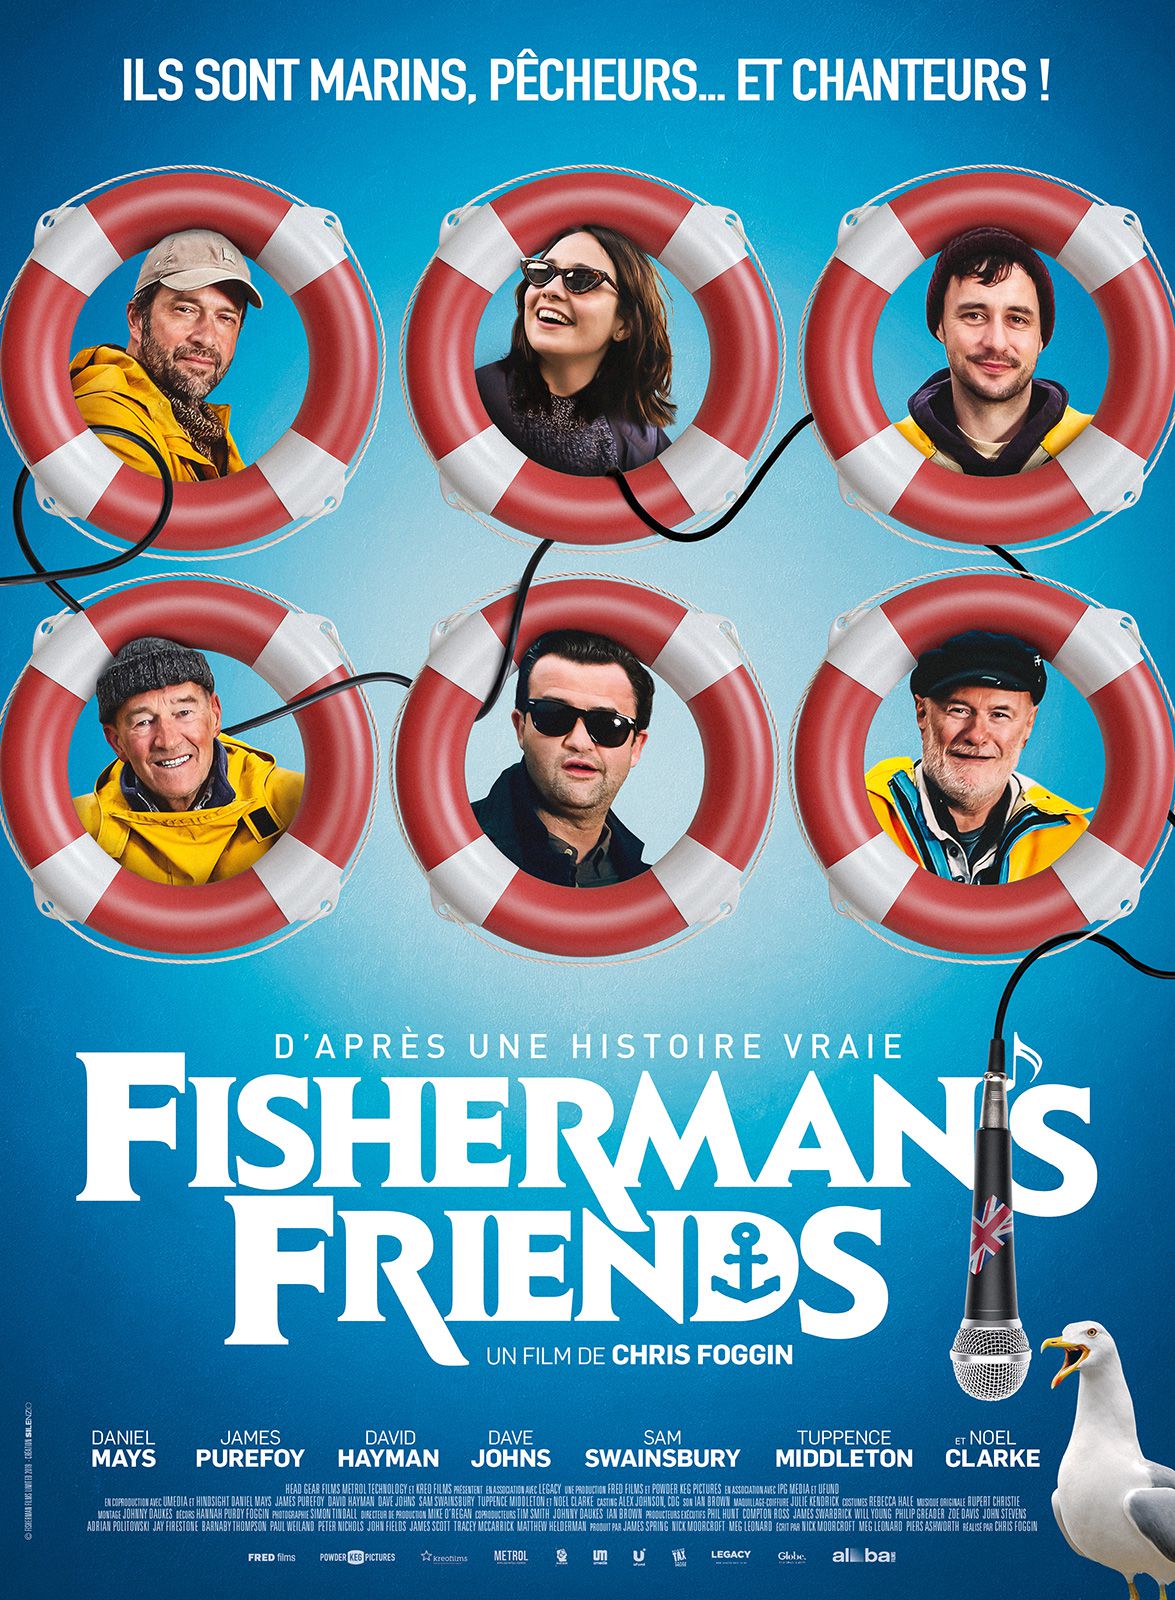 Fisherman's Friends - Film (2021) streaming VF gratuit complet